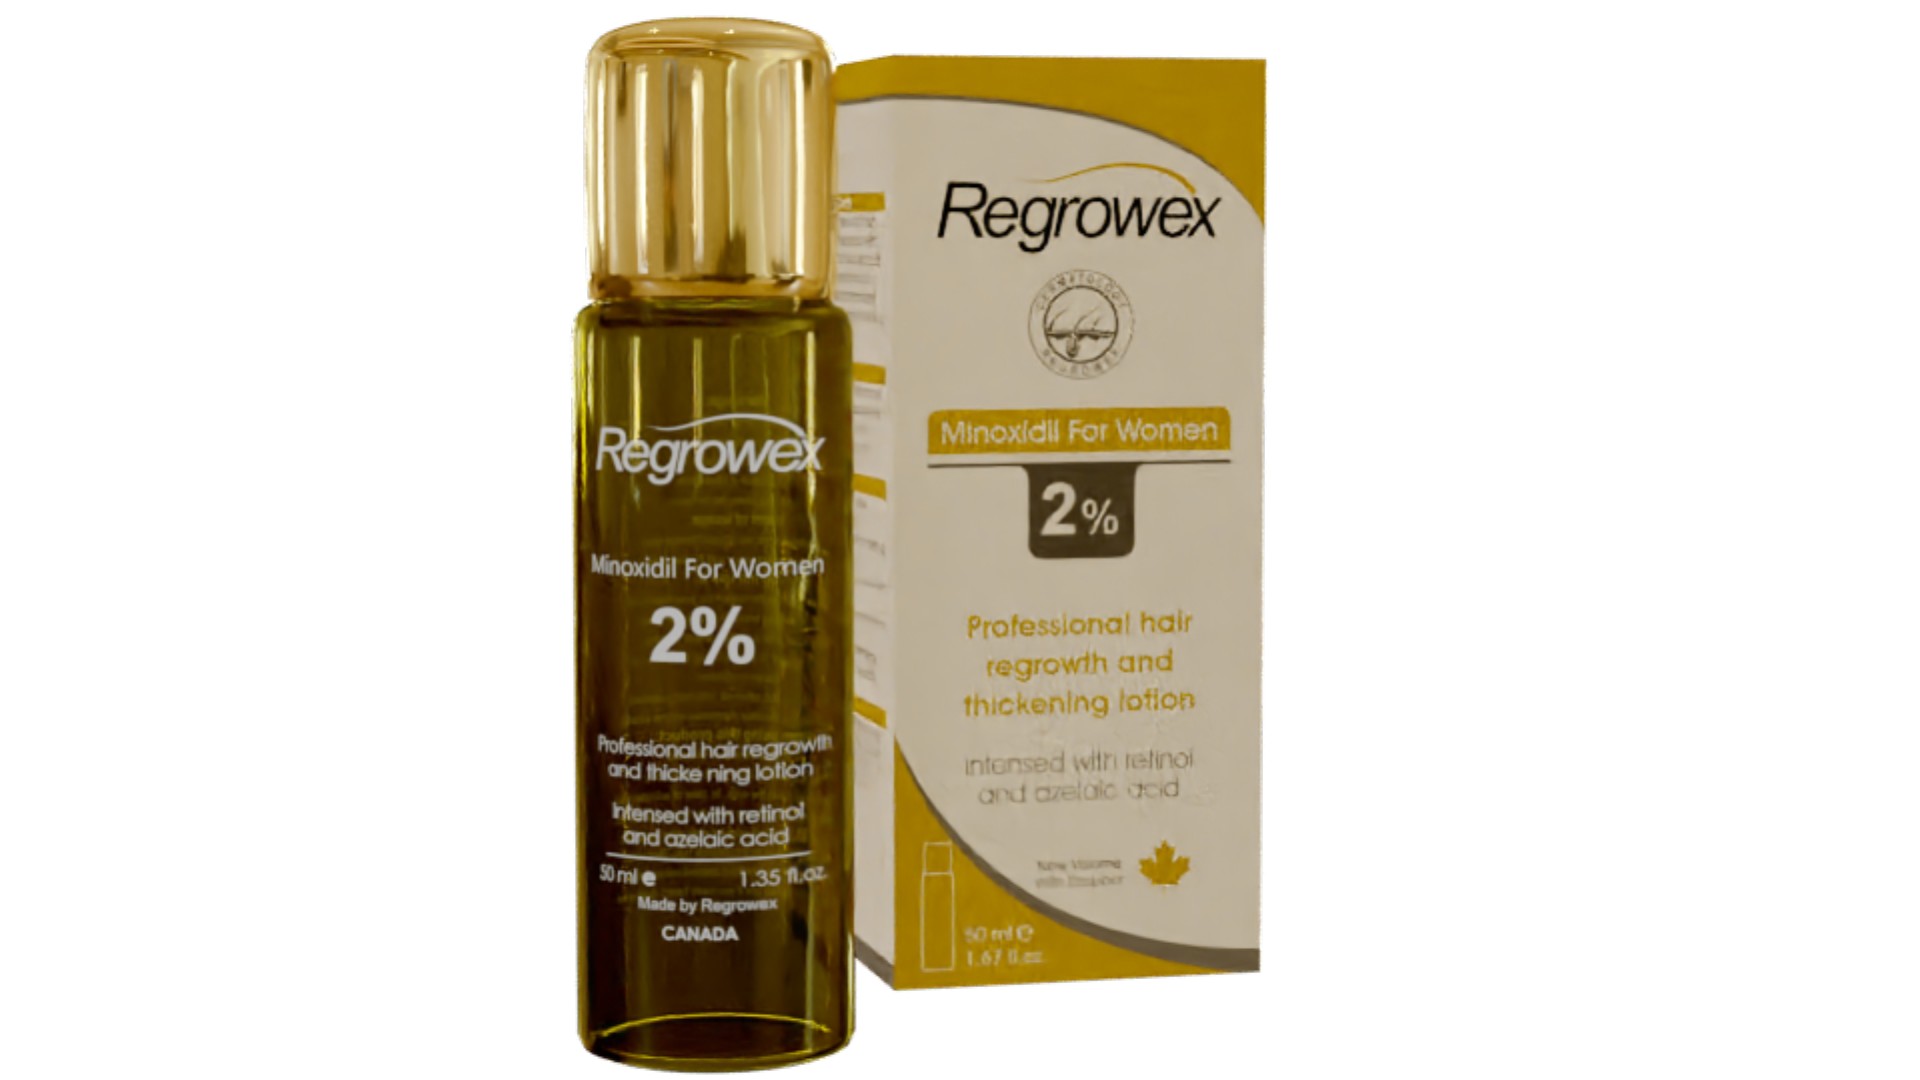 regrowex minoxidil solution 2% bottle with box